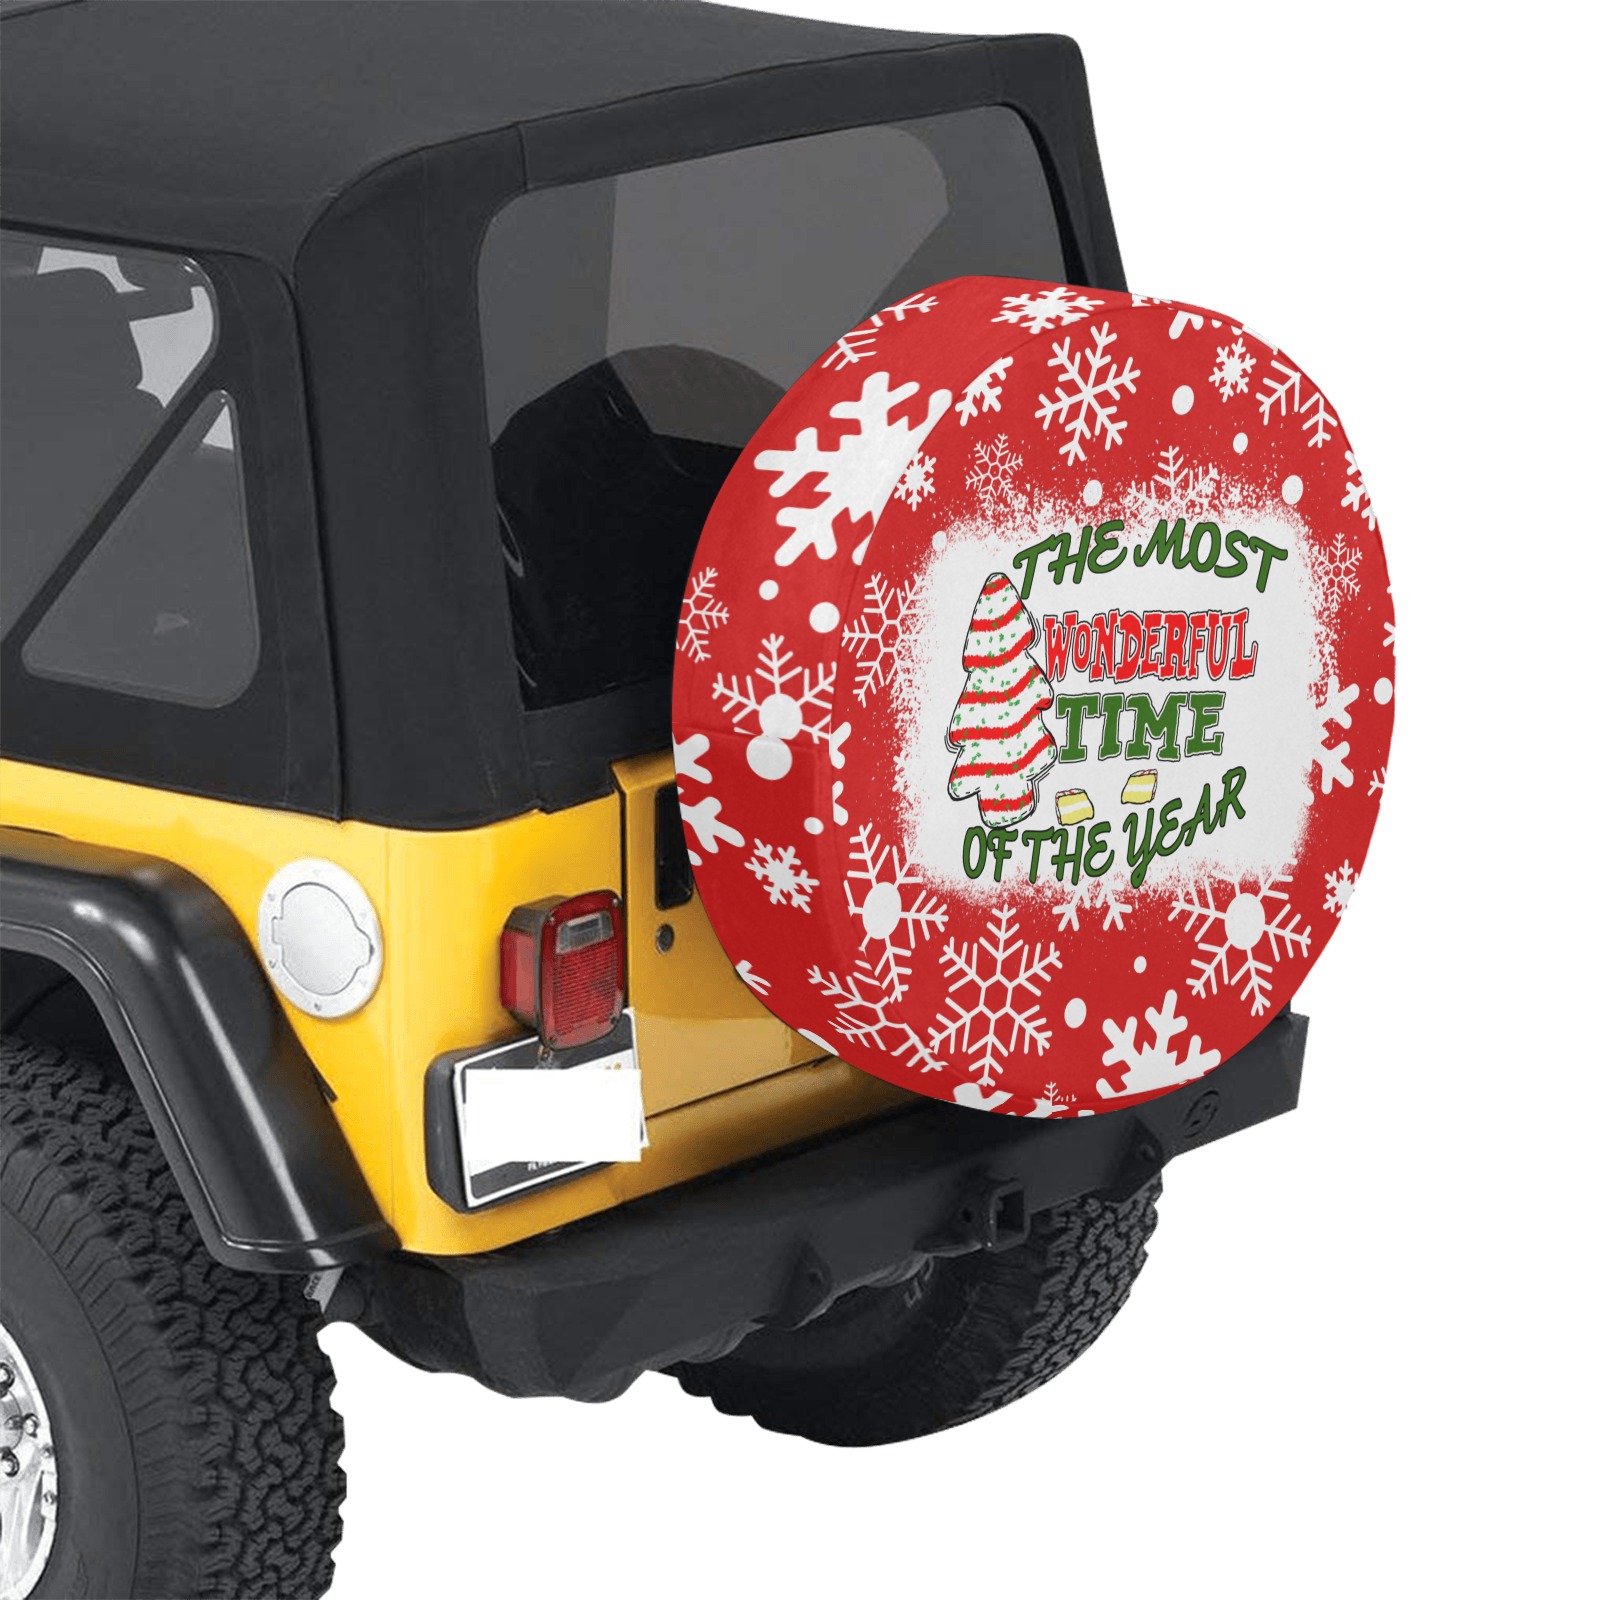 Most wonderful time of the year 32 32 Inch Spare Tire Cover